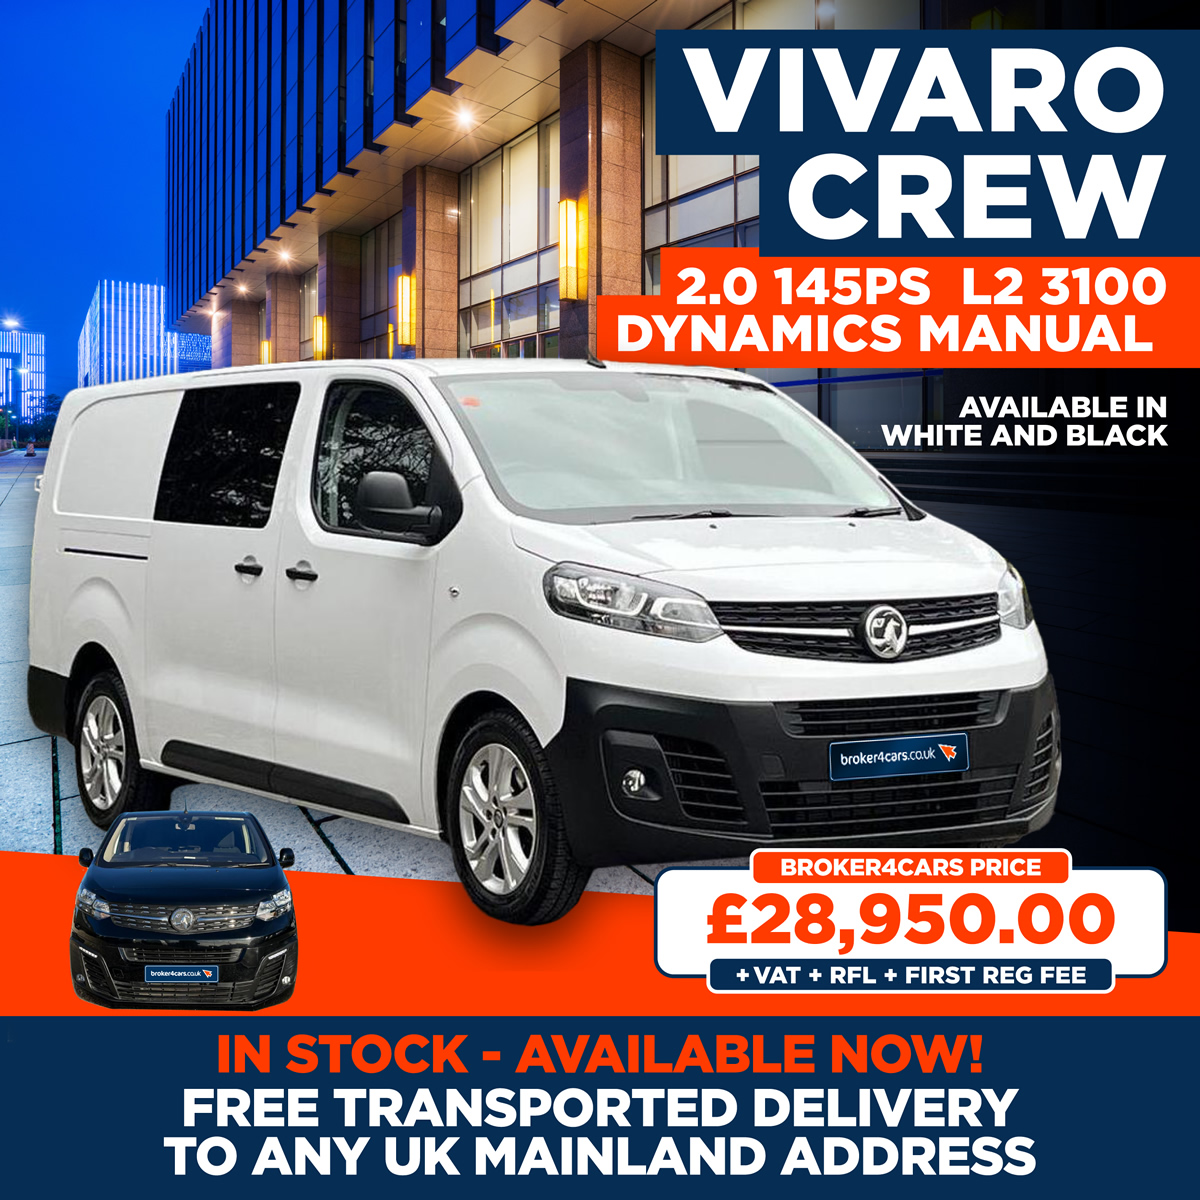 Vivaro Crew 2.0 145PS L2 3100 Dynamics Manual. Available in White and Black. In stock - available now. Free transported delivery to any uk mainland address. Broker4Cars Price £28,950 OTR